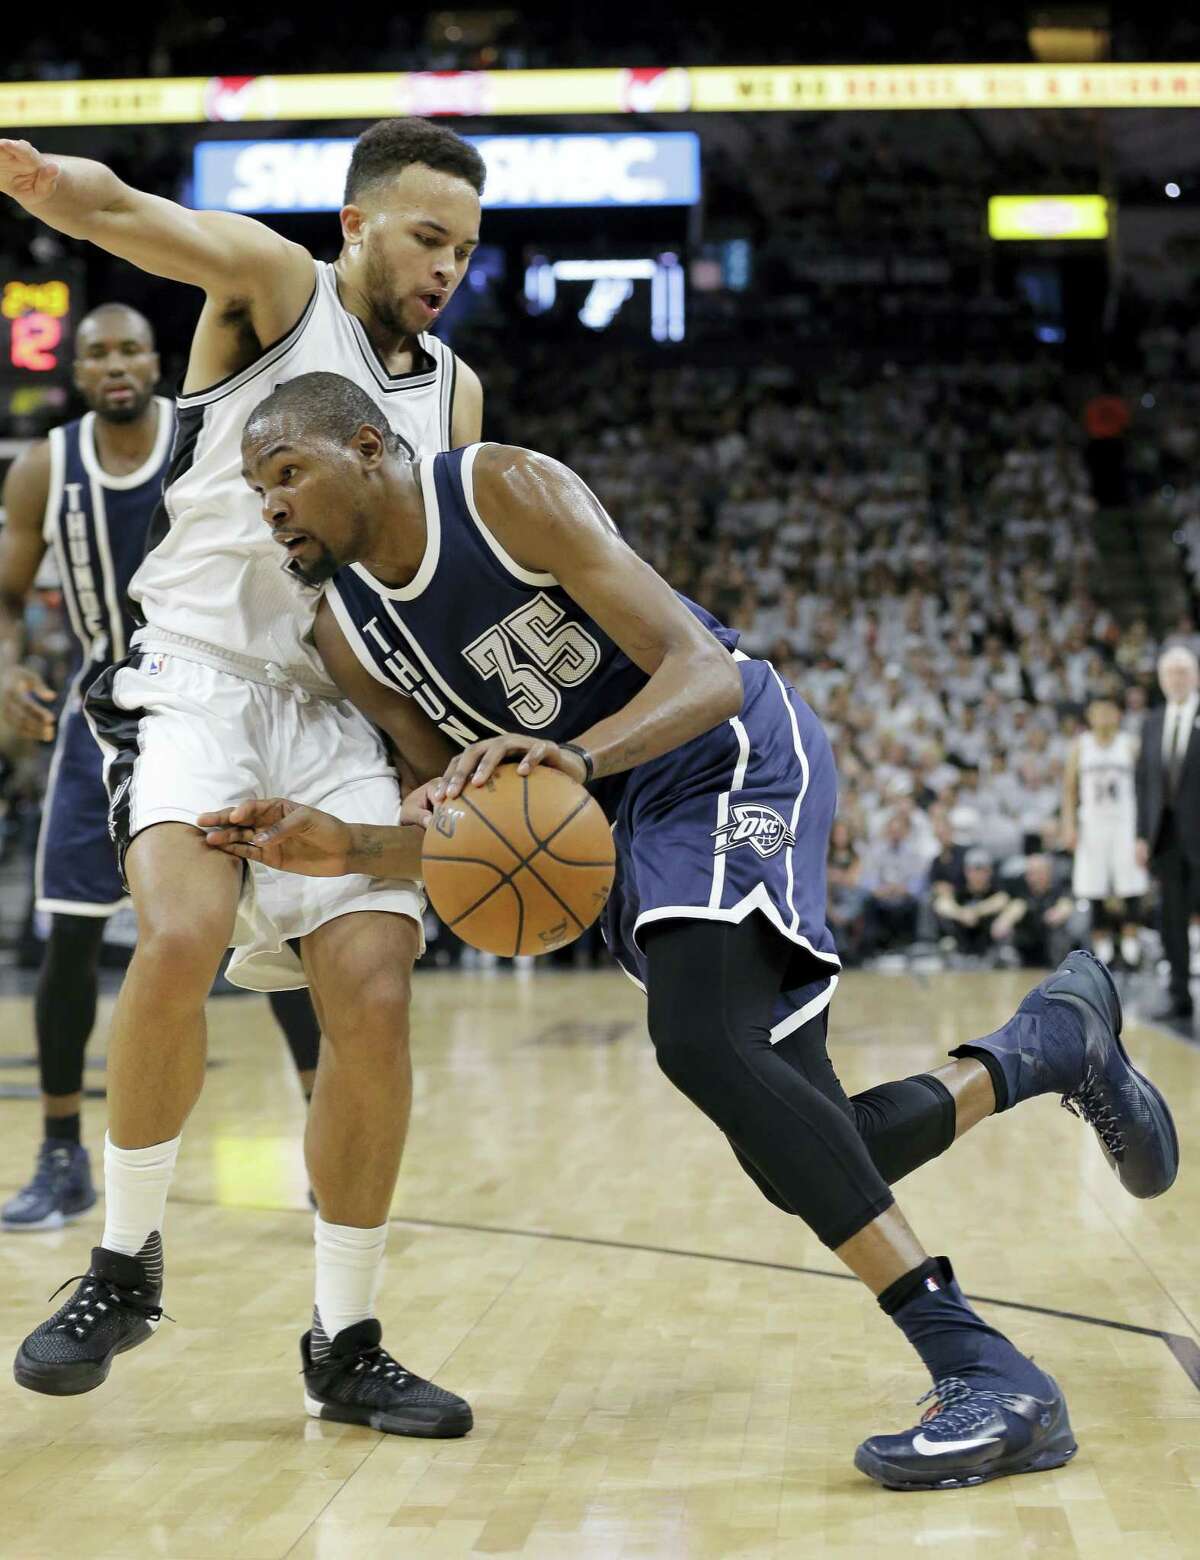 Oklahoma City Thunder forward Kevin Durant (35) drives around San Antonio Spurs forward Kyle Anderson (1) during the first half in Game 1 of a second-round NBA basketball playoff series on April 30, 2016 in San Antonio.